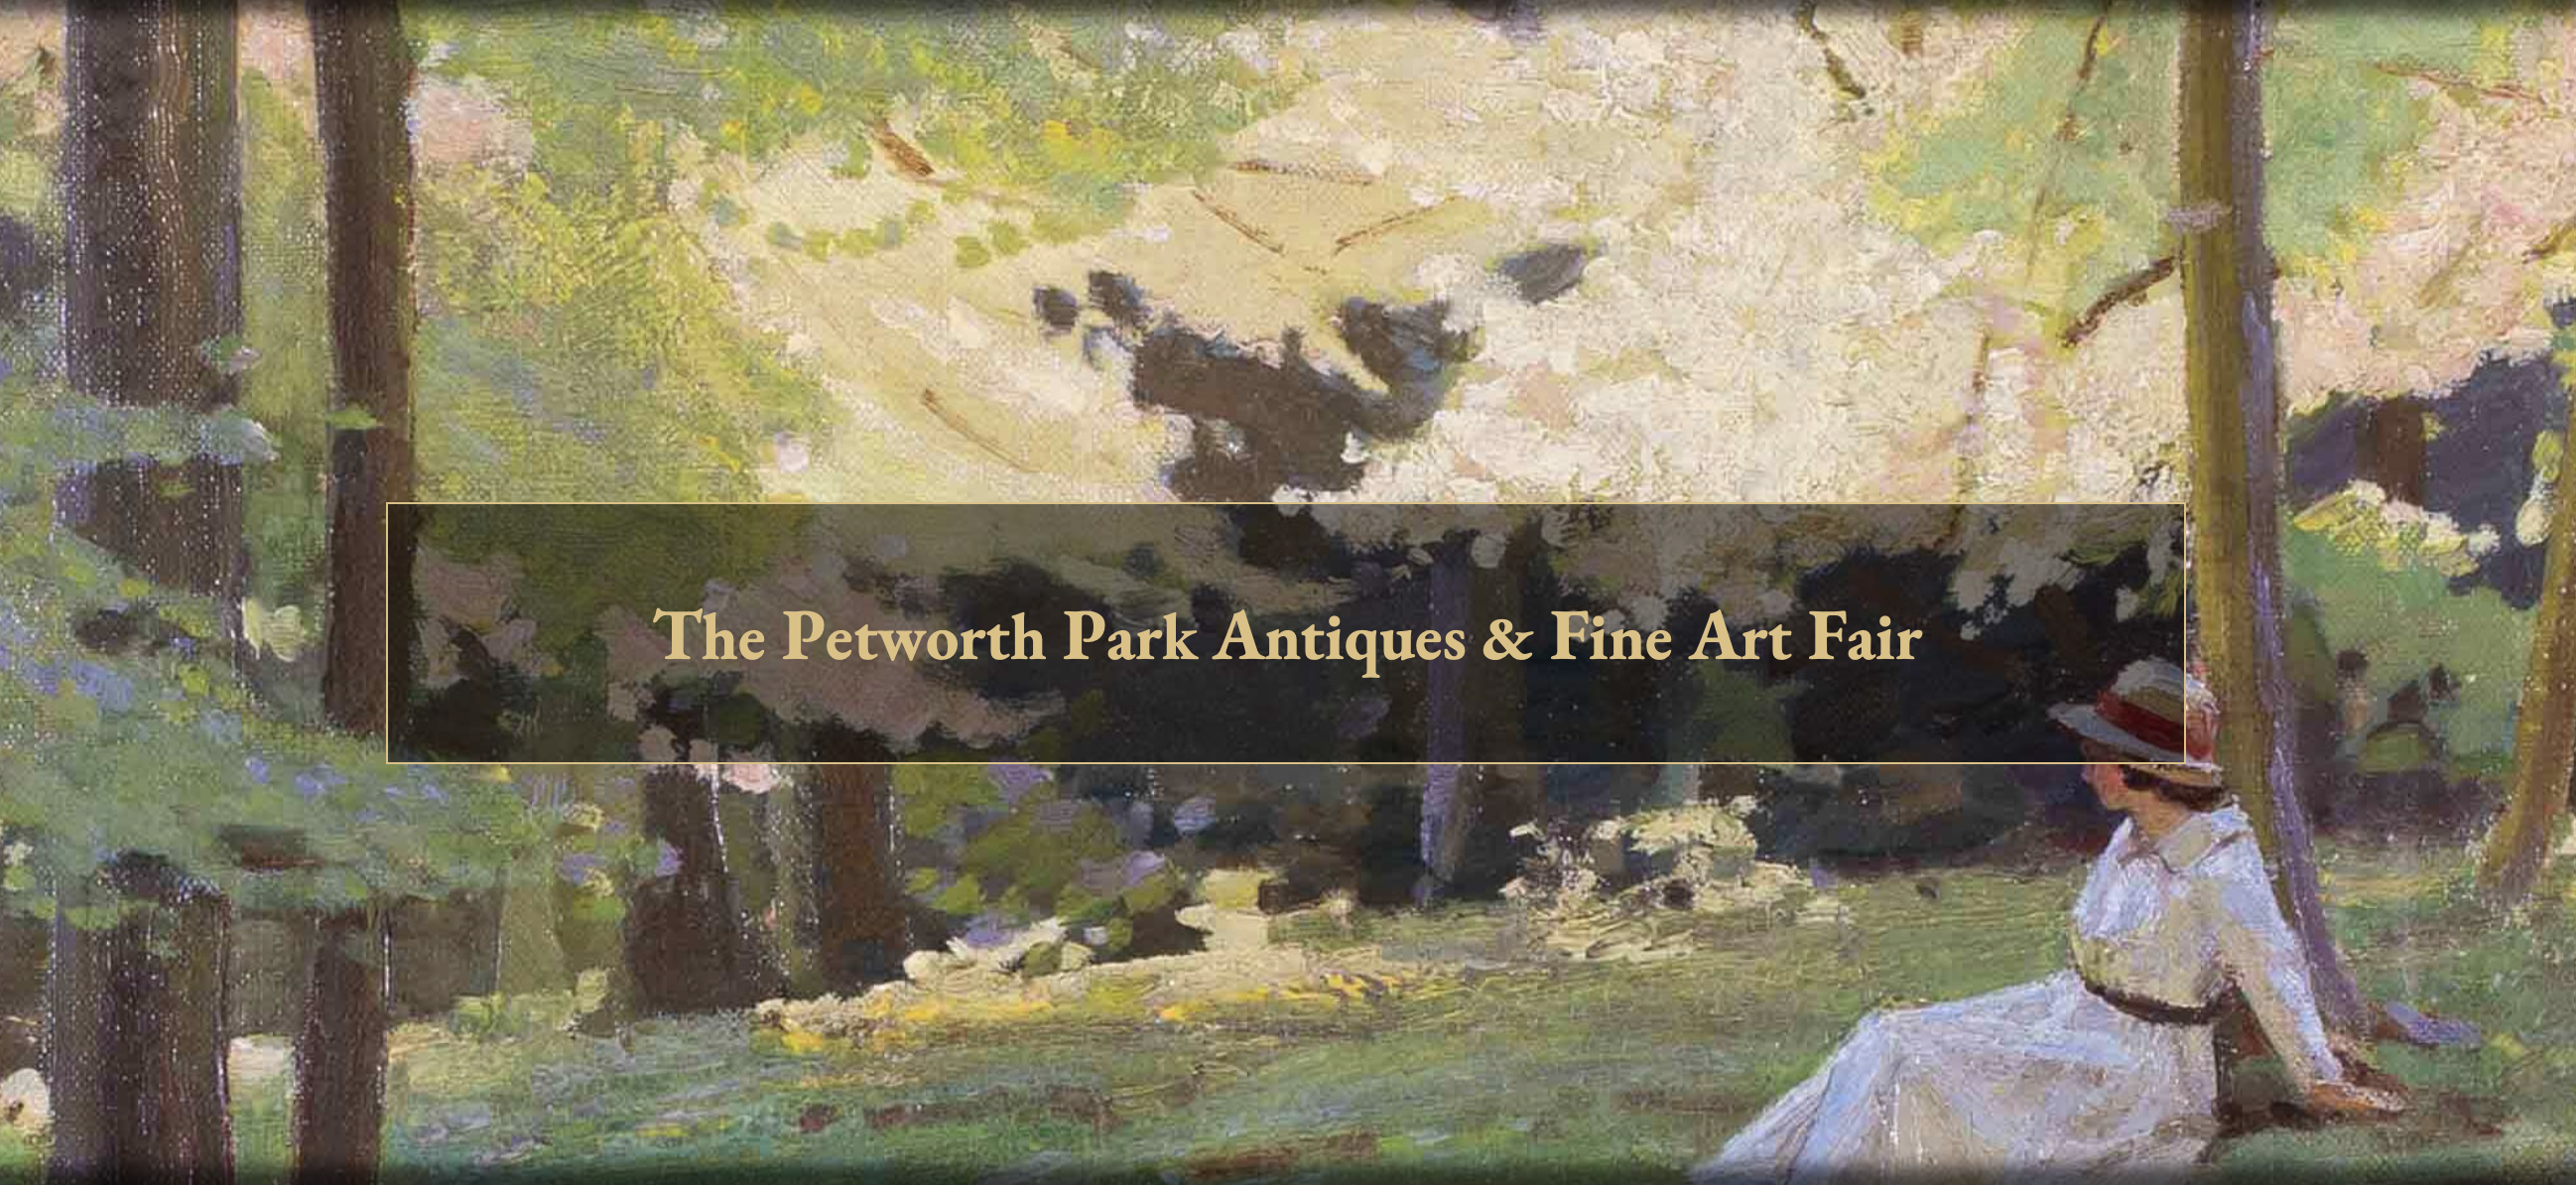 View of the Petowrth Park antiques and art fair logo